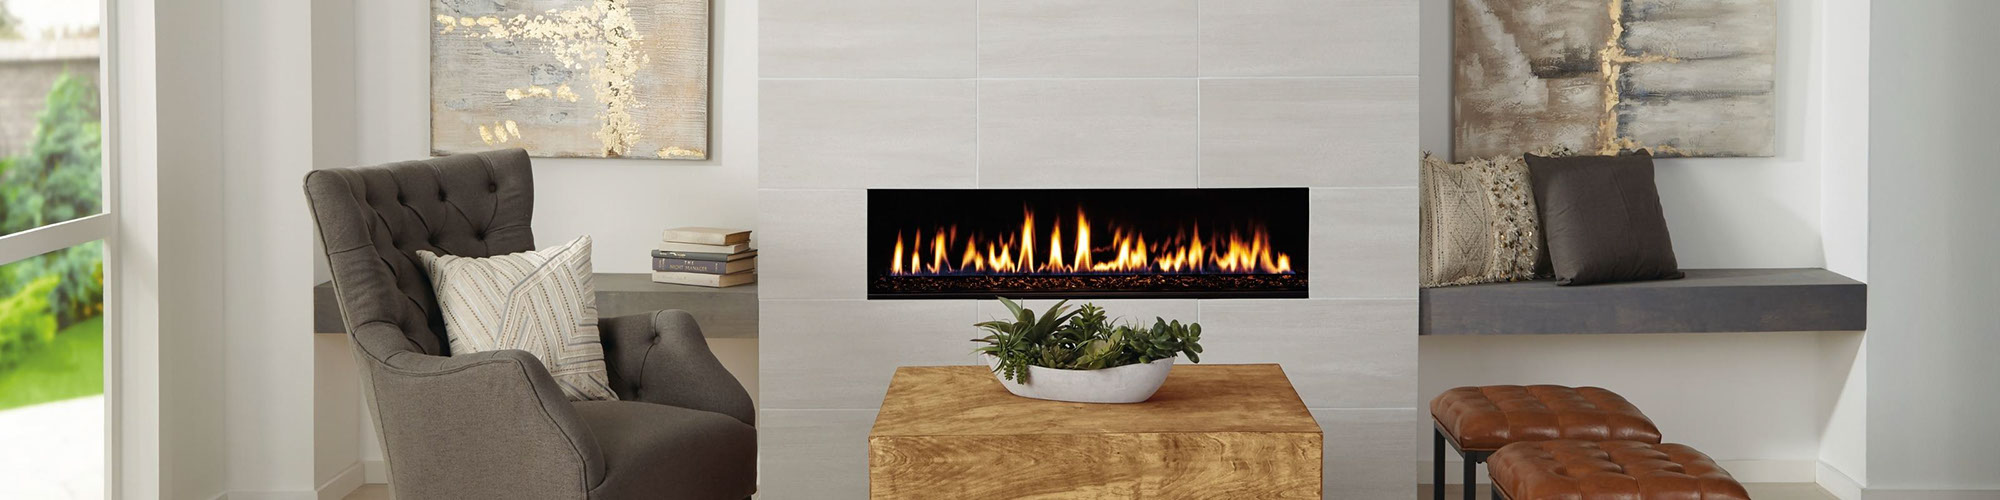 MZ_Persuade_RES_01_H_fireplace_41_banner